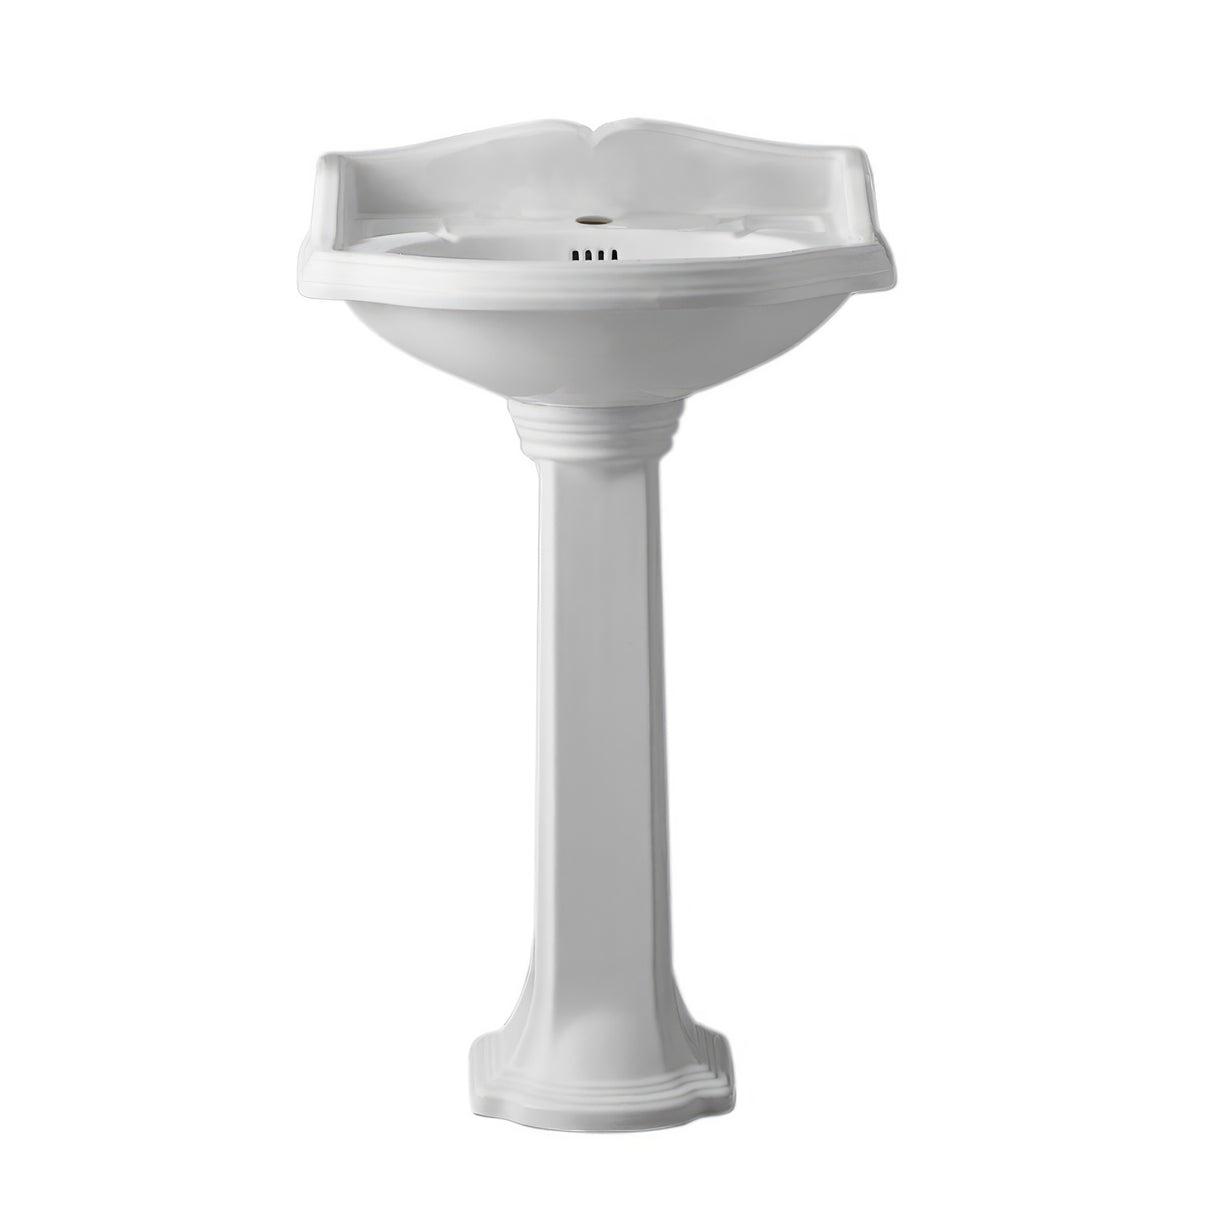 Isabella Collection Traditional Pedestal with an Integrated small oval bowl, Single Hole Faucet Drilling,Backsplash, Dual Soap Ledges, Decorative Trim and Overflow